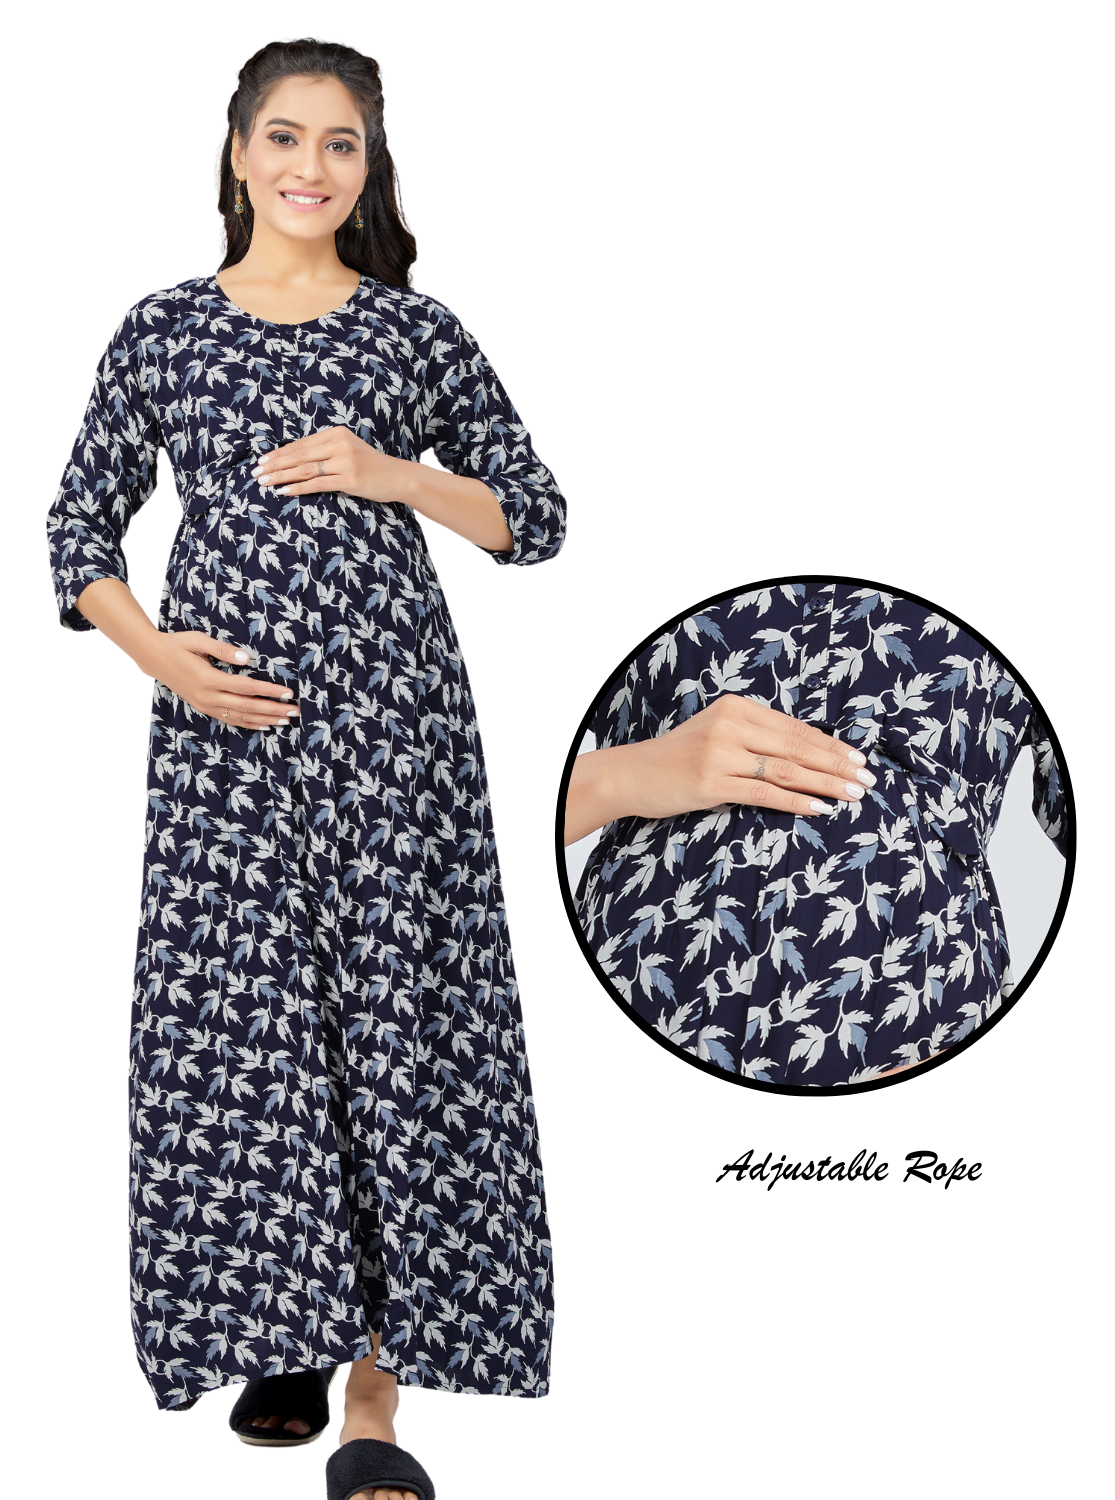 New Collection'sONLY MINE 4-IN-ONE Mom's Wear - Soft & Smooth Rayon | Maternity | Feeding | Maxi | Long Frock | Casual Wear | Perfect Maternity Collection for Pregnancy Women's